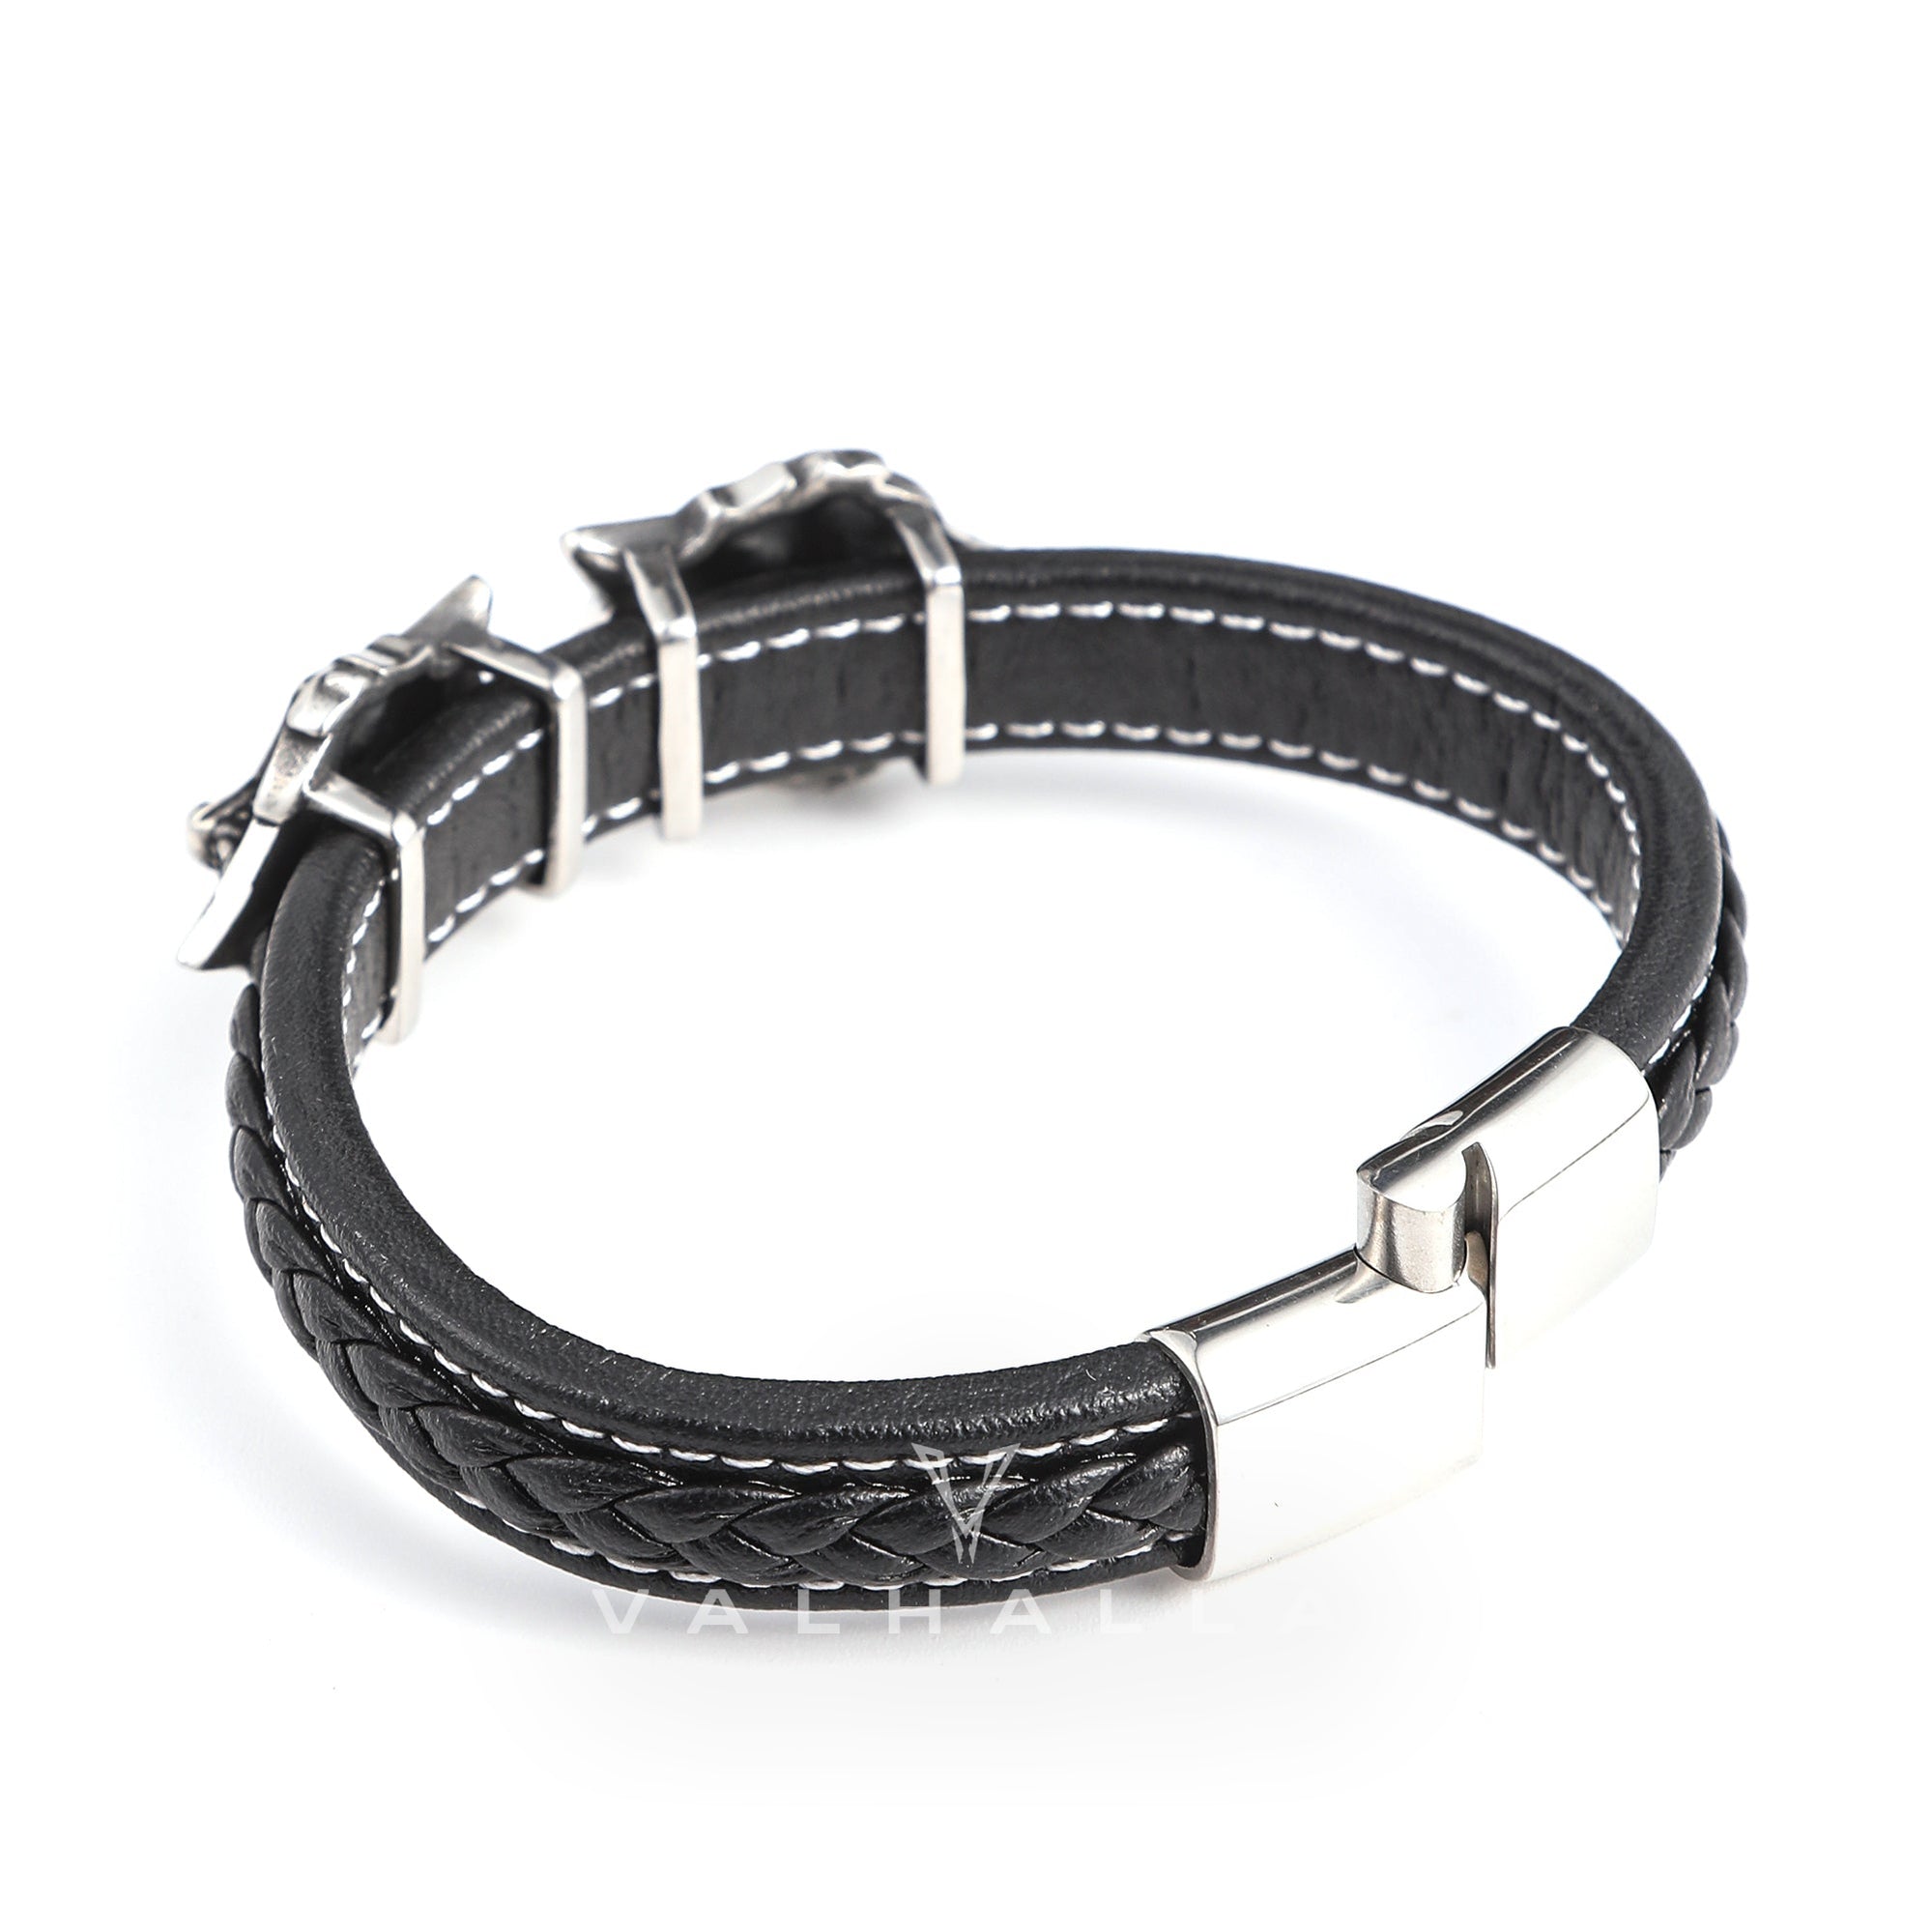 Nordic Wolf Stainless Steel Leather Viking Bracelet